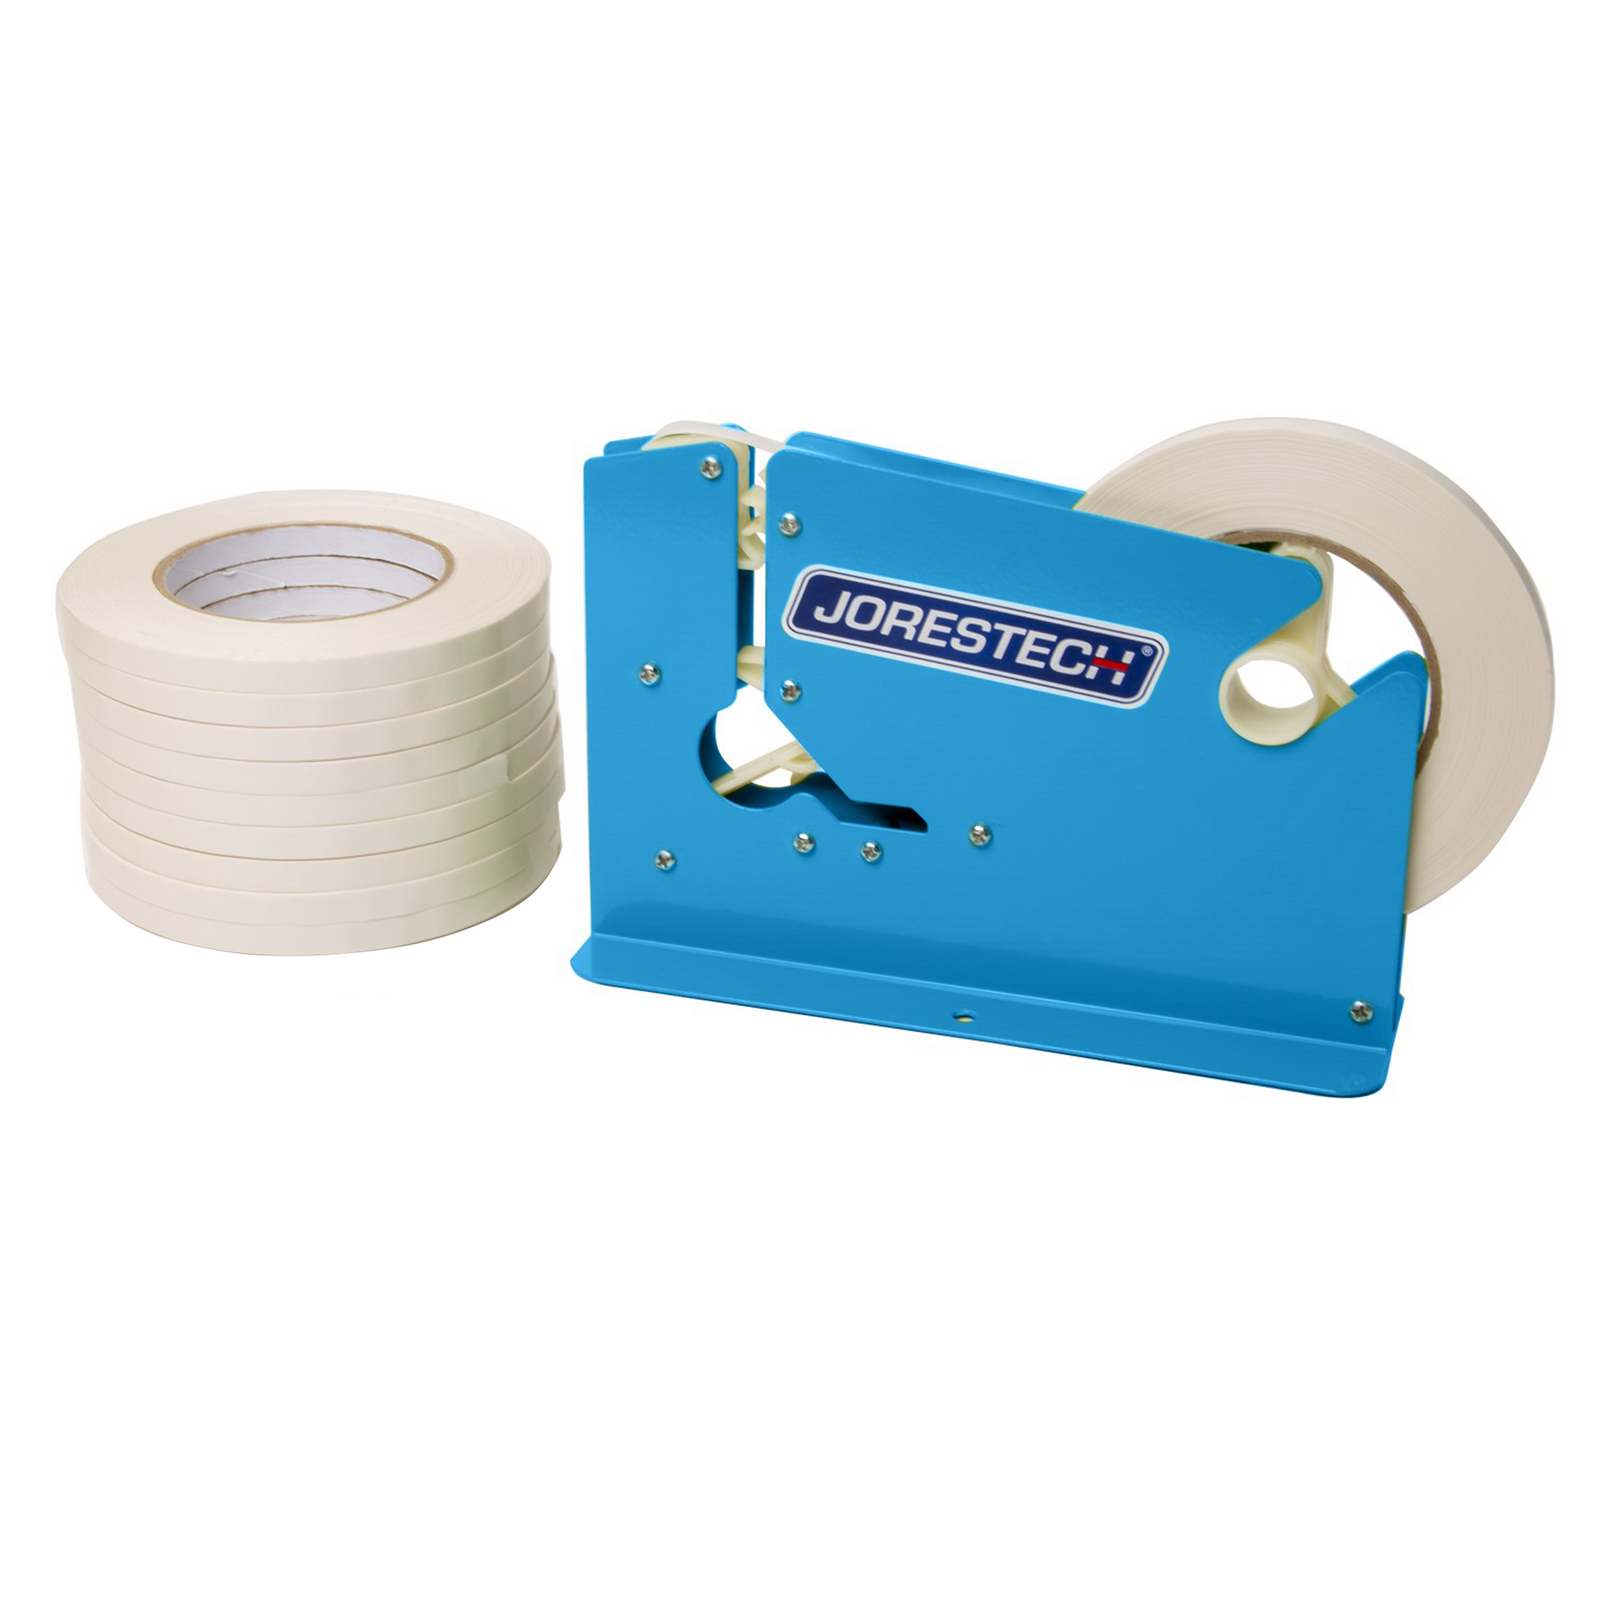 A JORESTECH powder coated blue manual bag taper with 10 white self adhesive tape rolls over white background